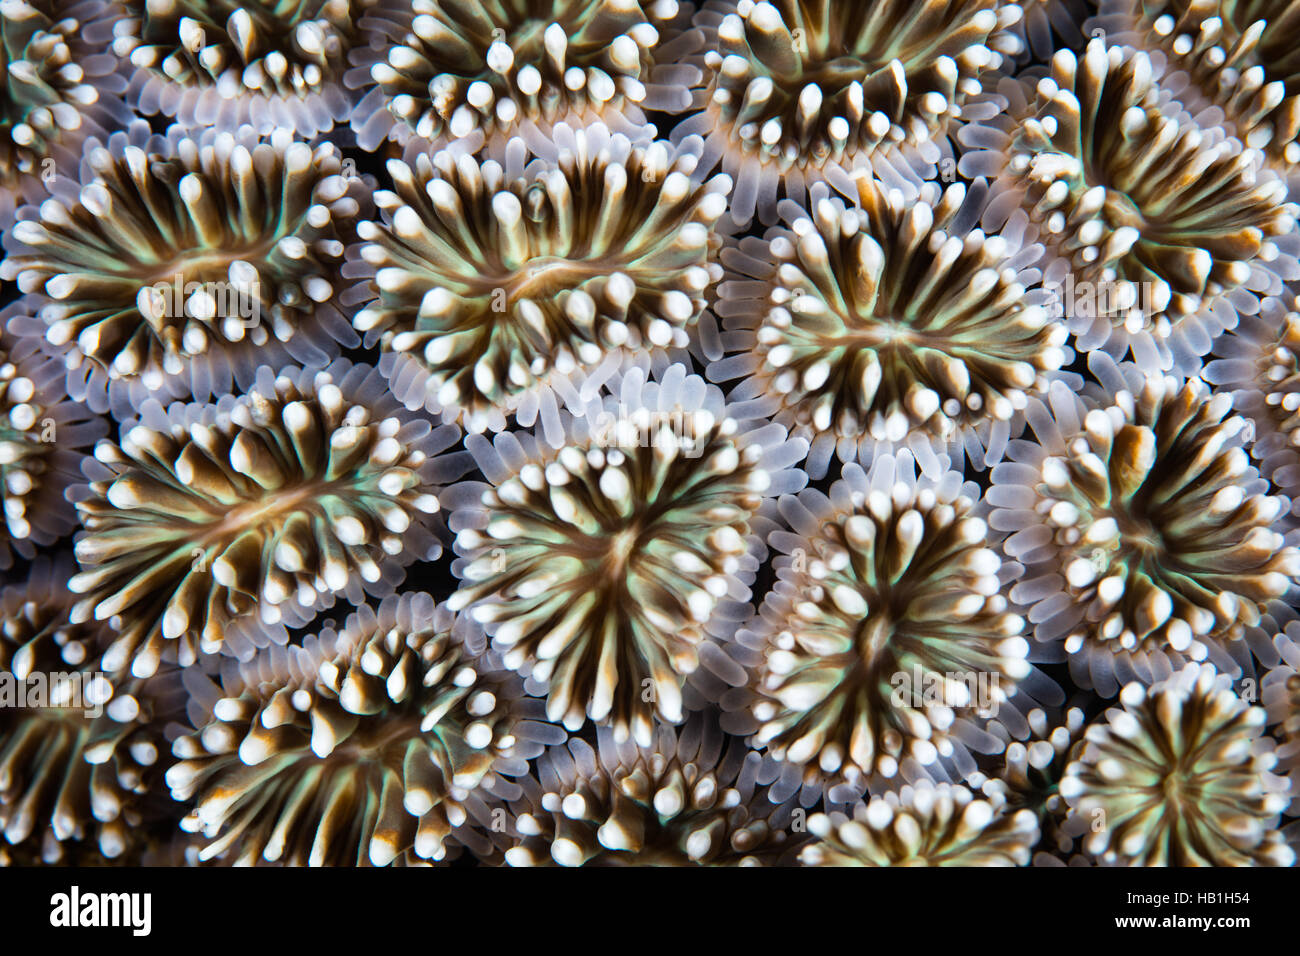 Detail of a coral colony (Galaxea sp.) growing on a reef in Indonesia. This region harbors extraordinary marine biodiversity. Stock Photo